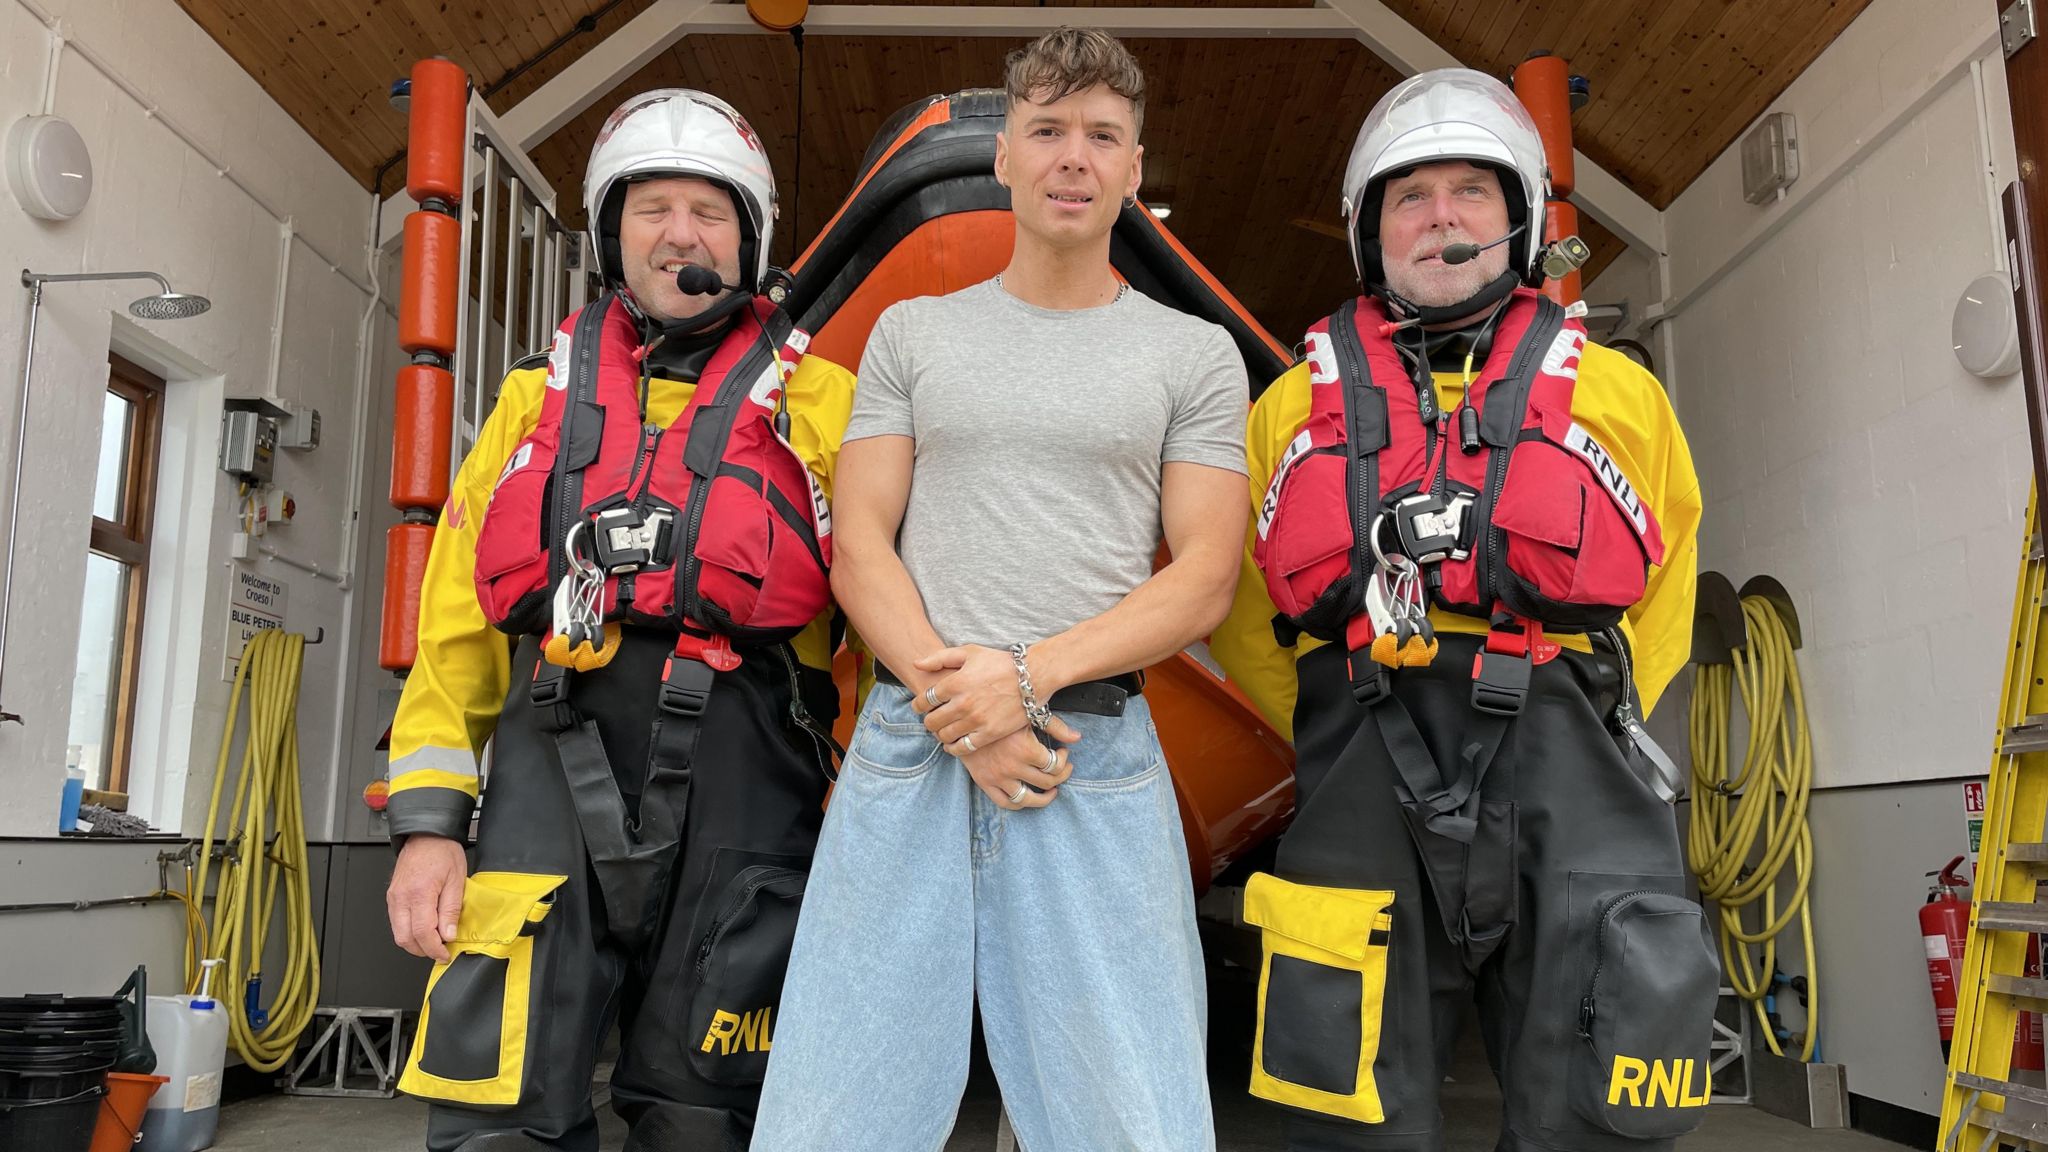 Ren Gill posing between two fully kitted out members of the RNLI crew at Beaumaris Lifeboat Station on Anglesey